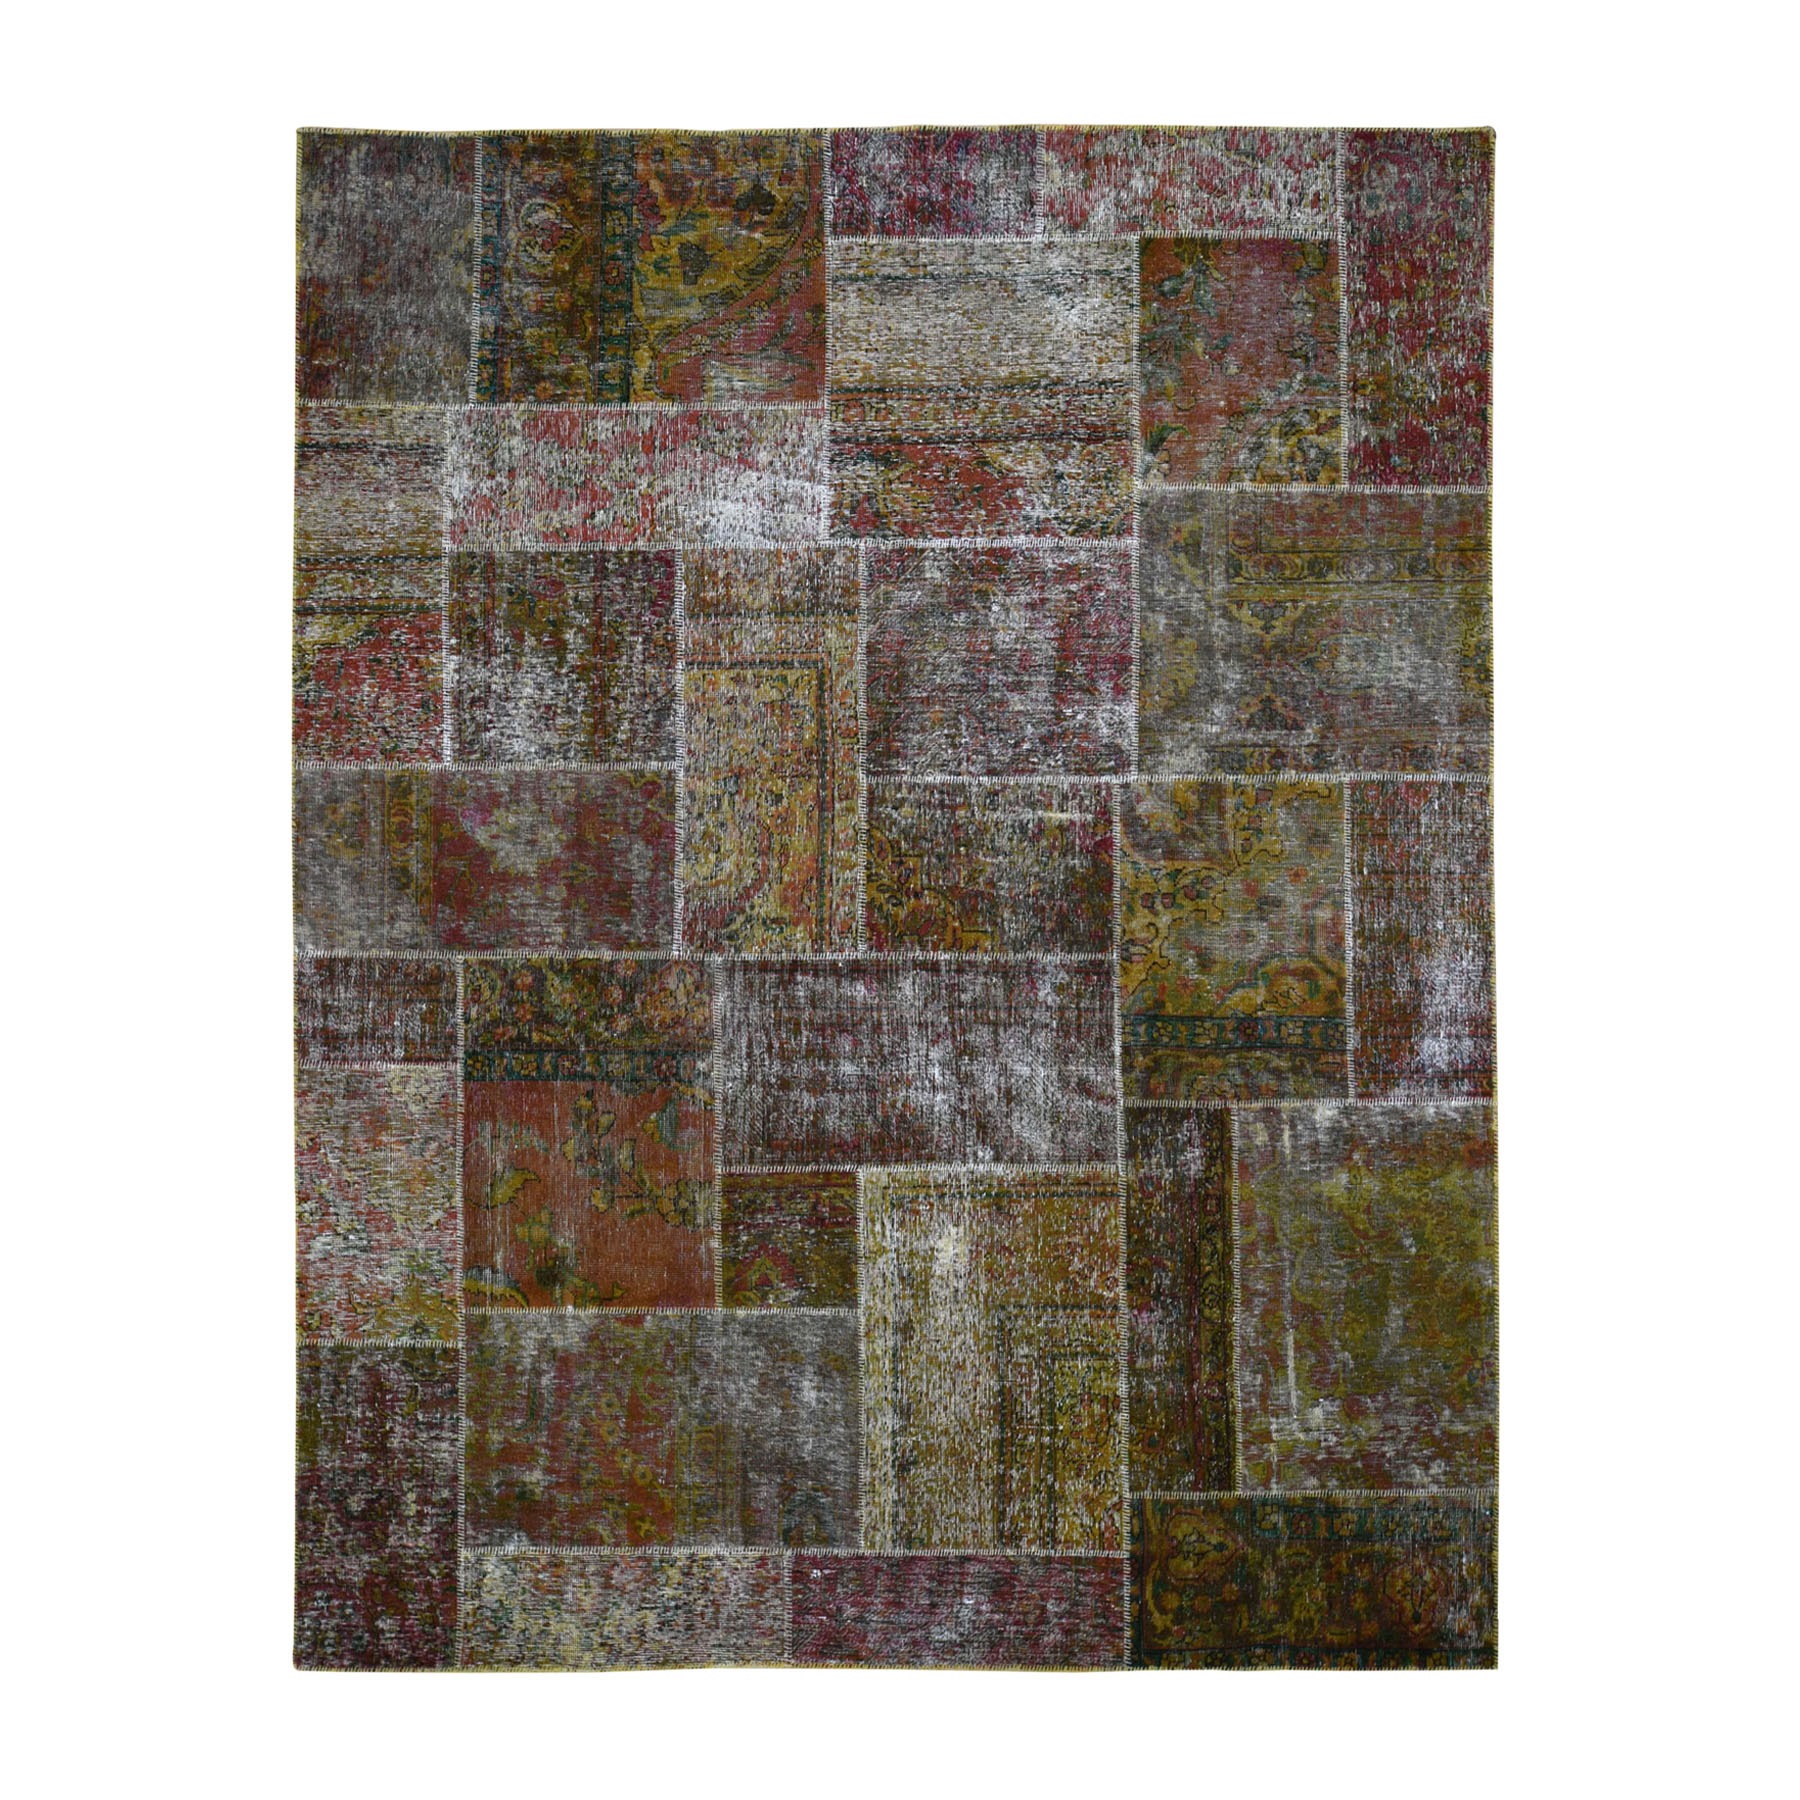 8'x9'9" Pure Wool Overdyed Patchwork Vintage Hand Woven  Oriental Rug 